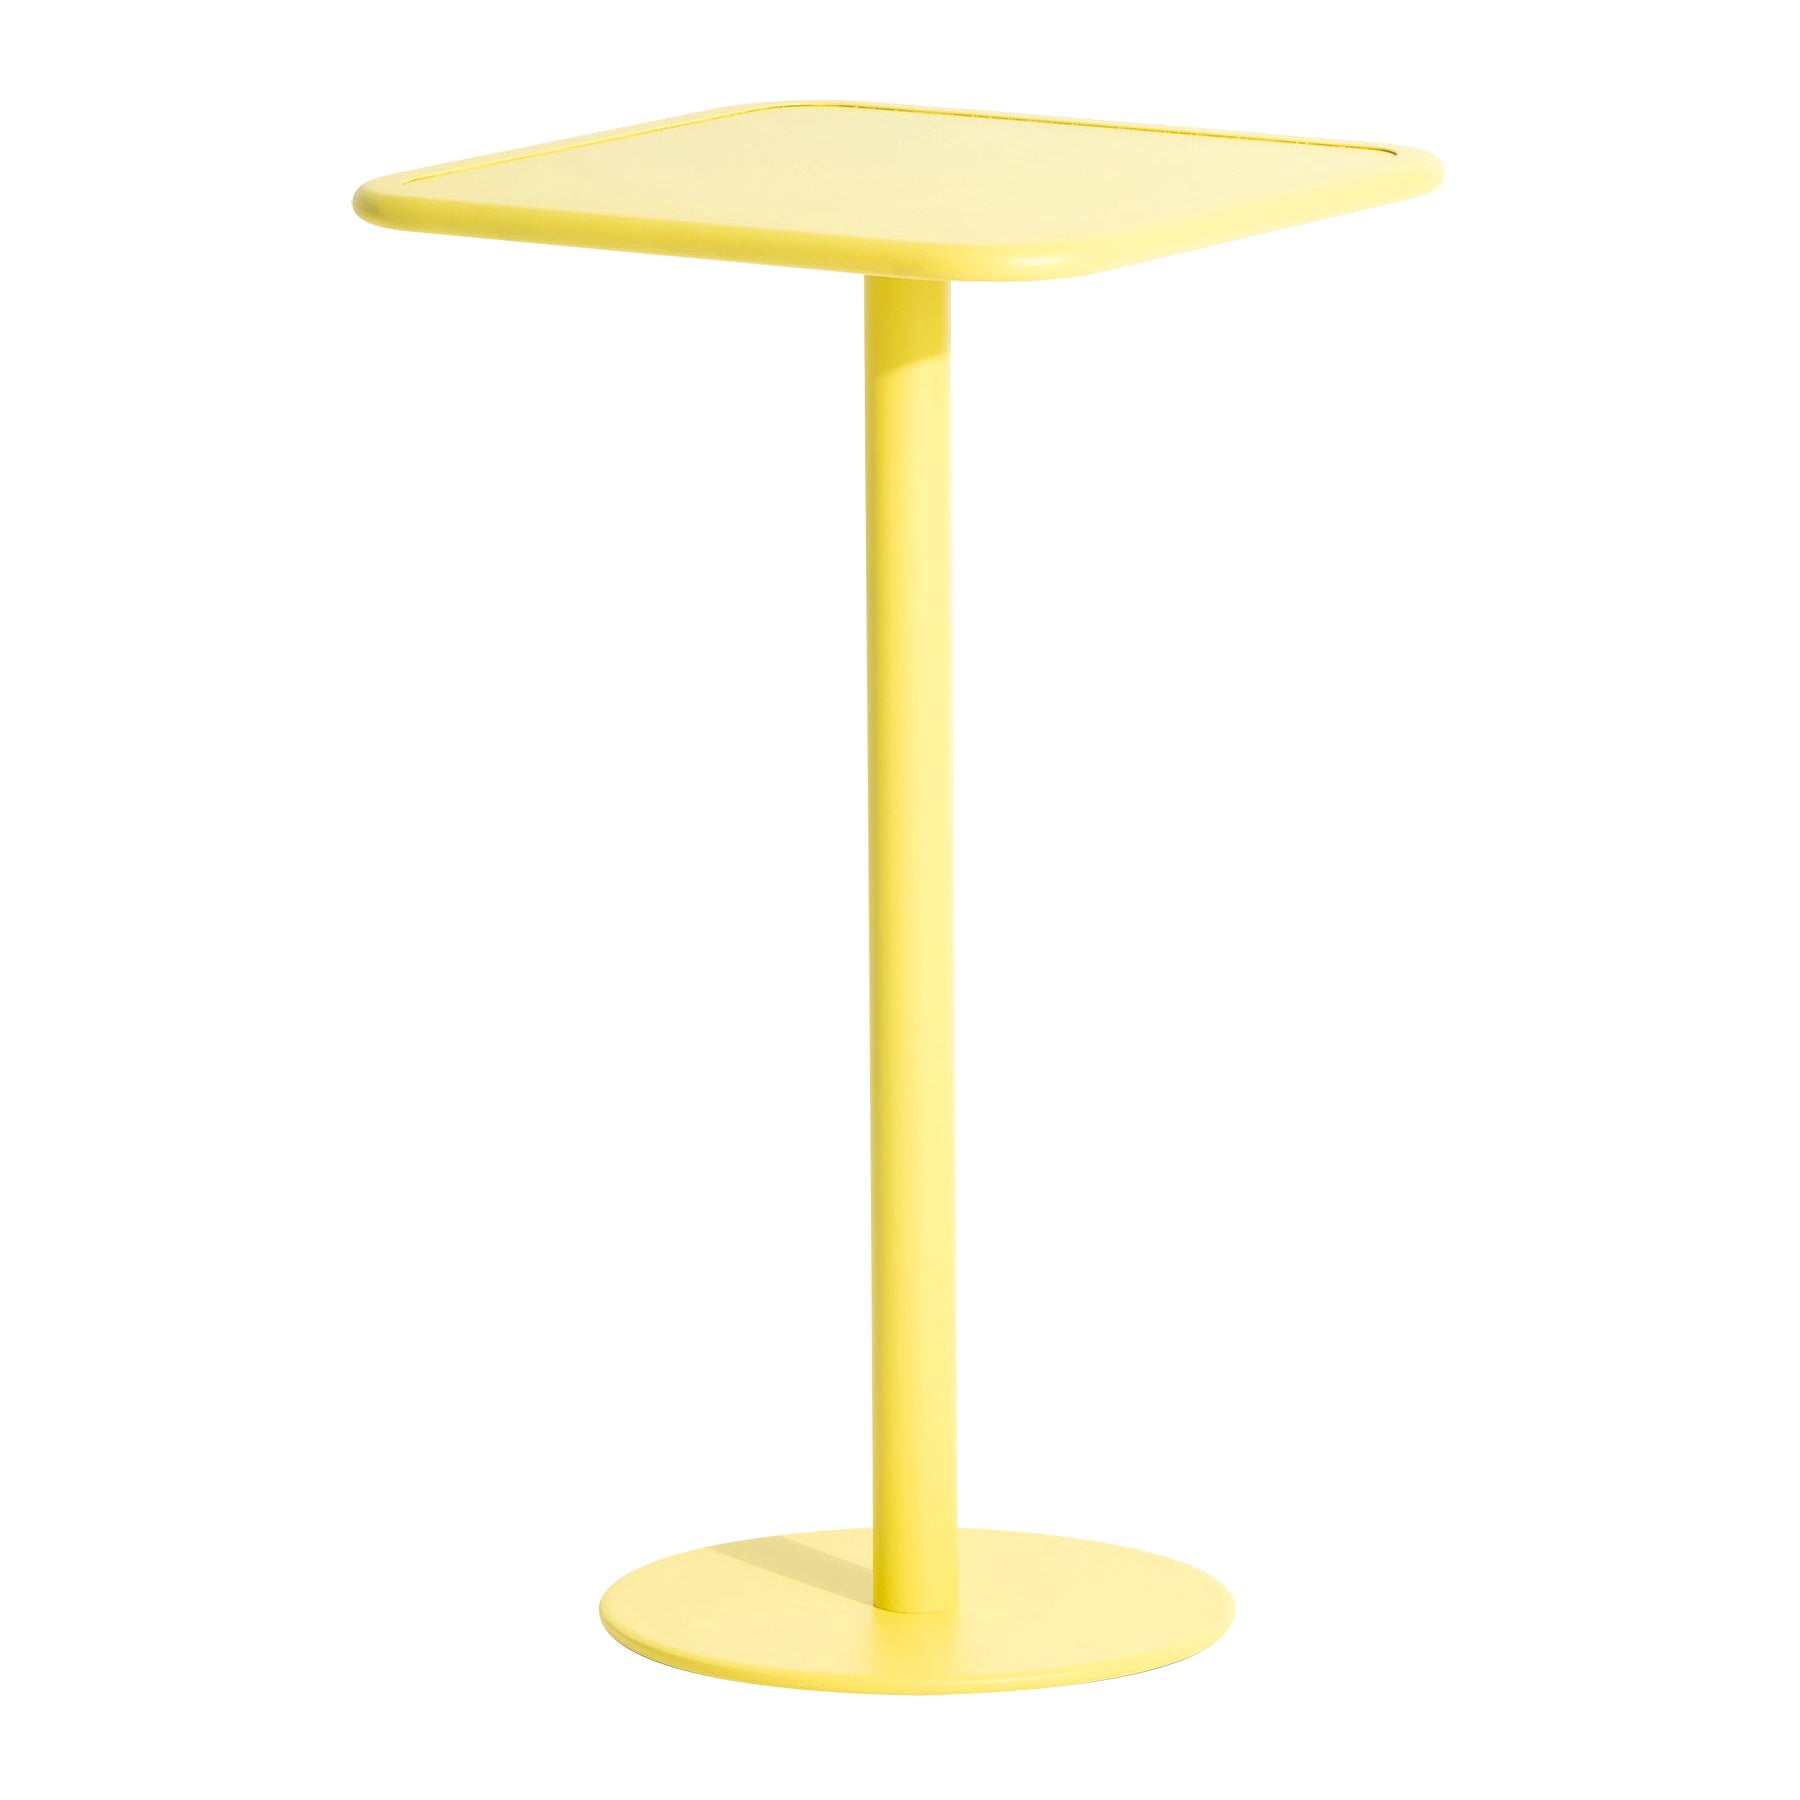 Petite Friture Week-End Square High Table in Yellow Aluminium, 2017 For Sale